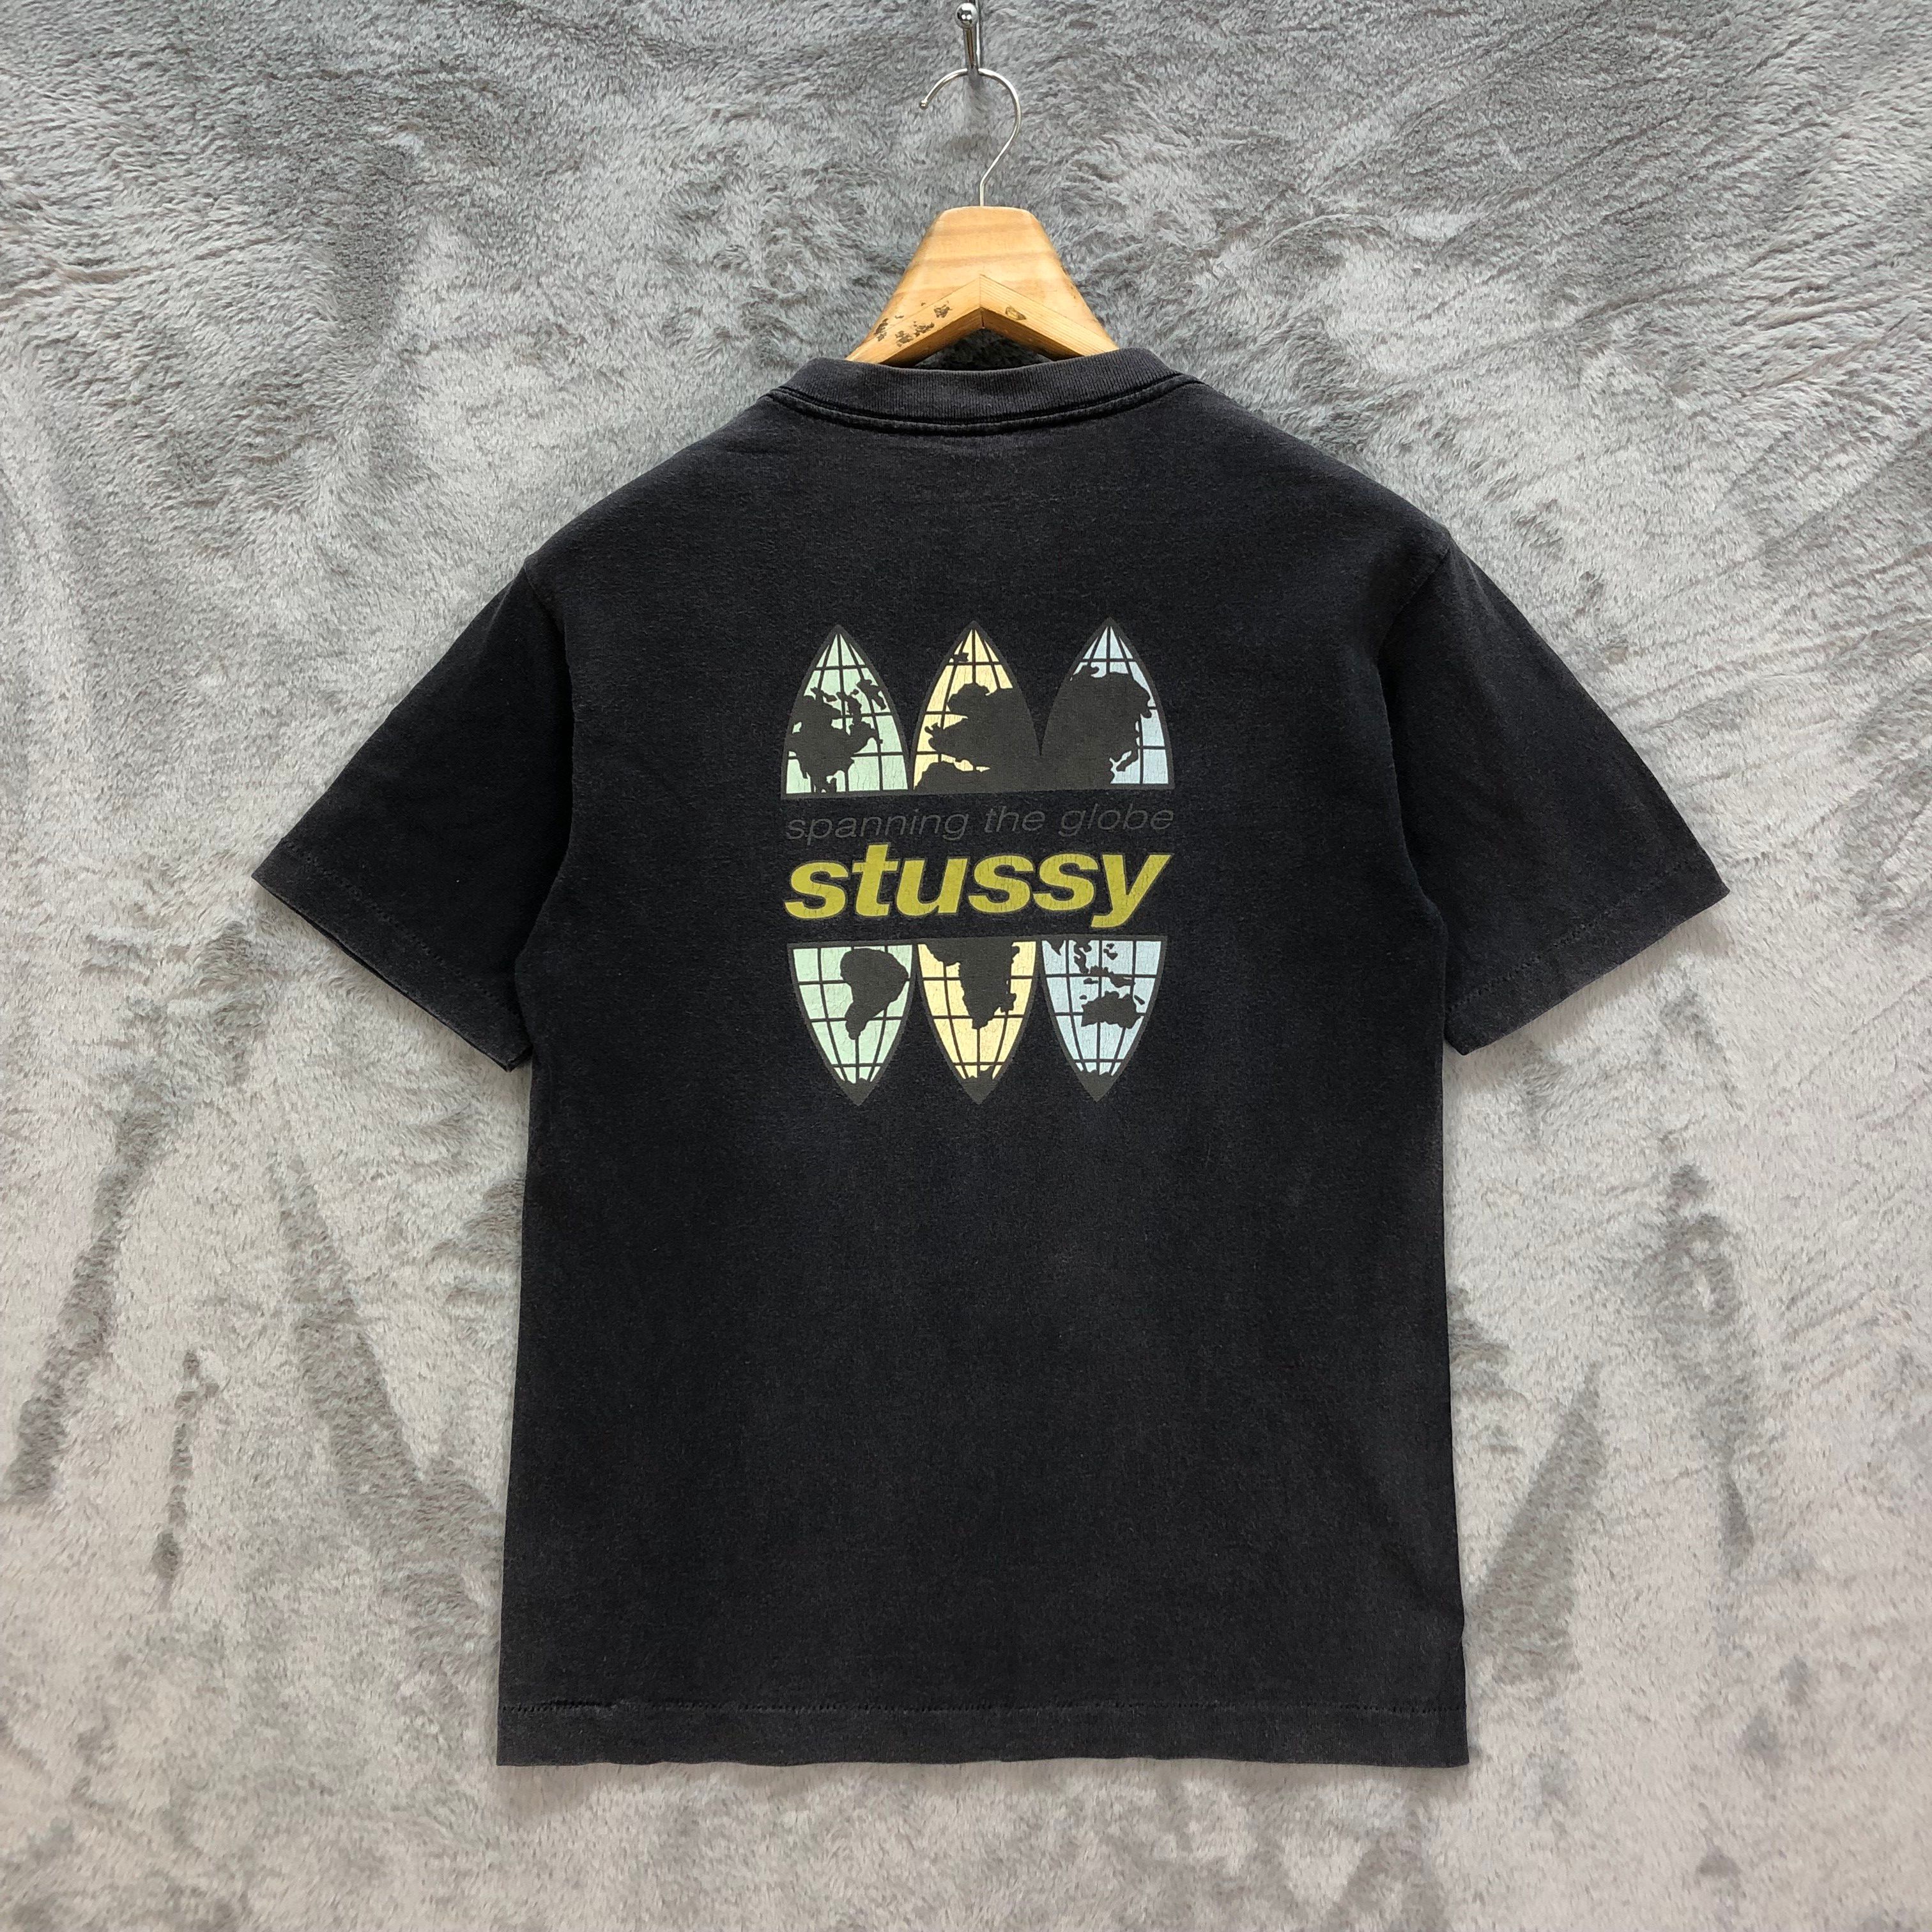 Pre-owned Made In Usa X Stussy Vintage Stussy Spanning The Globe T Shirt 6415-65 In Black